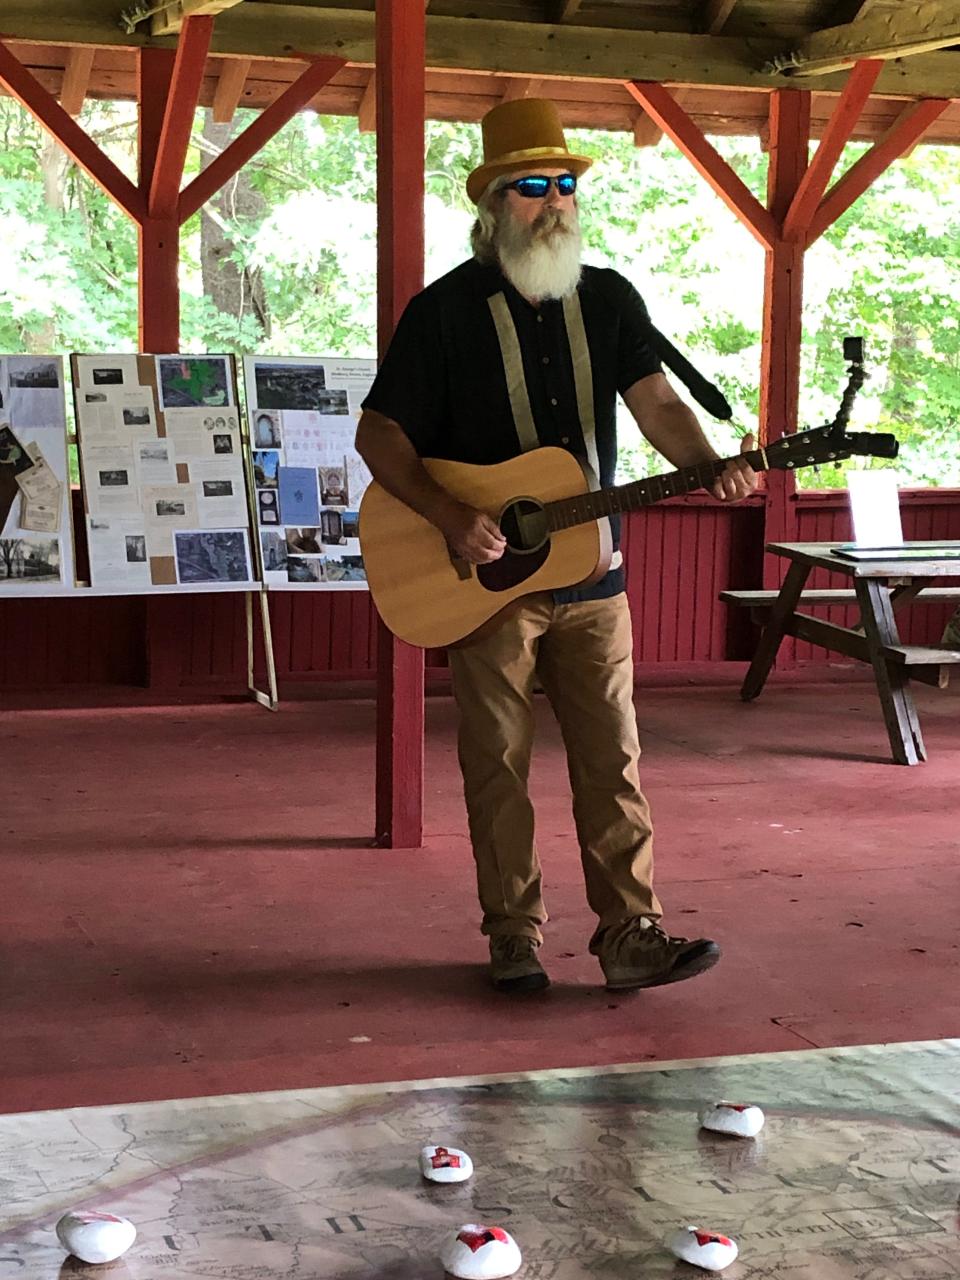 Guitarist Chris Loring sings a song written by the late Stephen Eisner for Norwell's centennial in 1988. The song was recently rediscovered on a cassette tape. Loring performed at the Stetson Homestead pavilion in Norwell for the town's Stetson Heritage Day on Aug. 19. 2023.